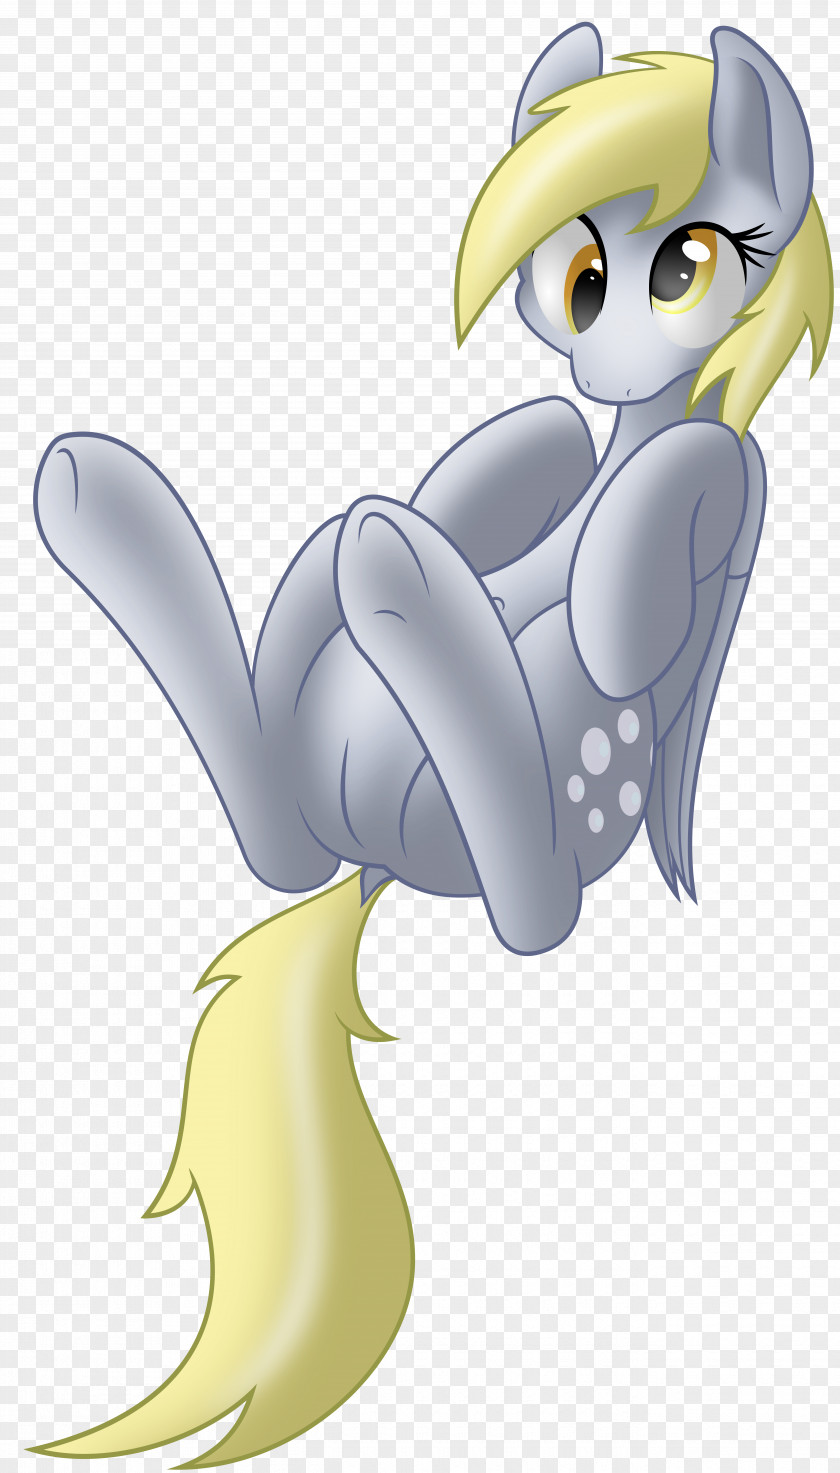 Fuzzy Navel Derpy Hooves Pony Character Drawing Fan Art PNG